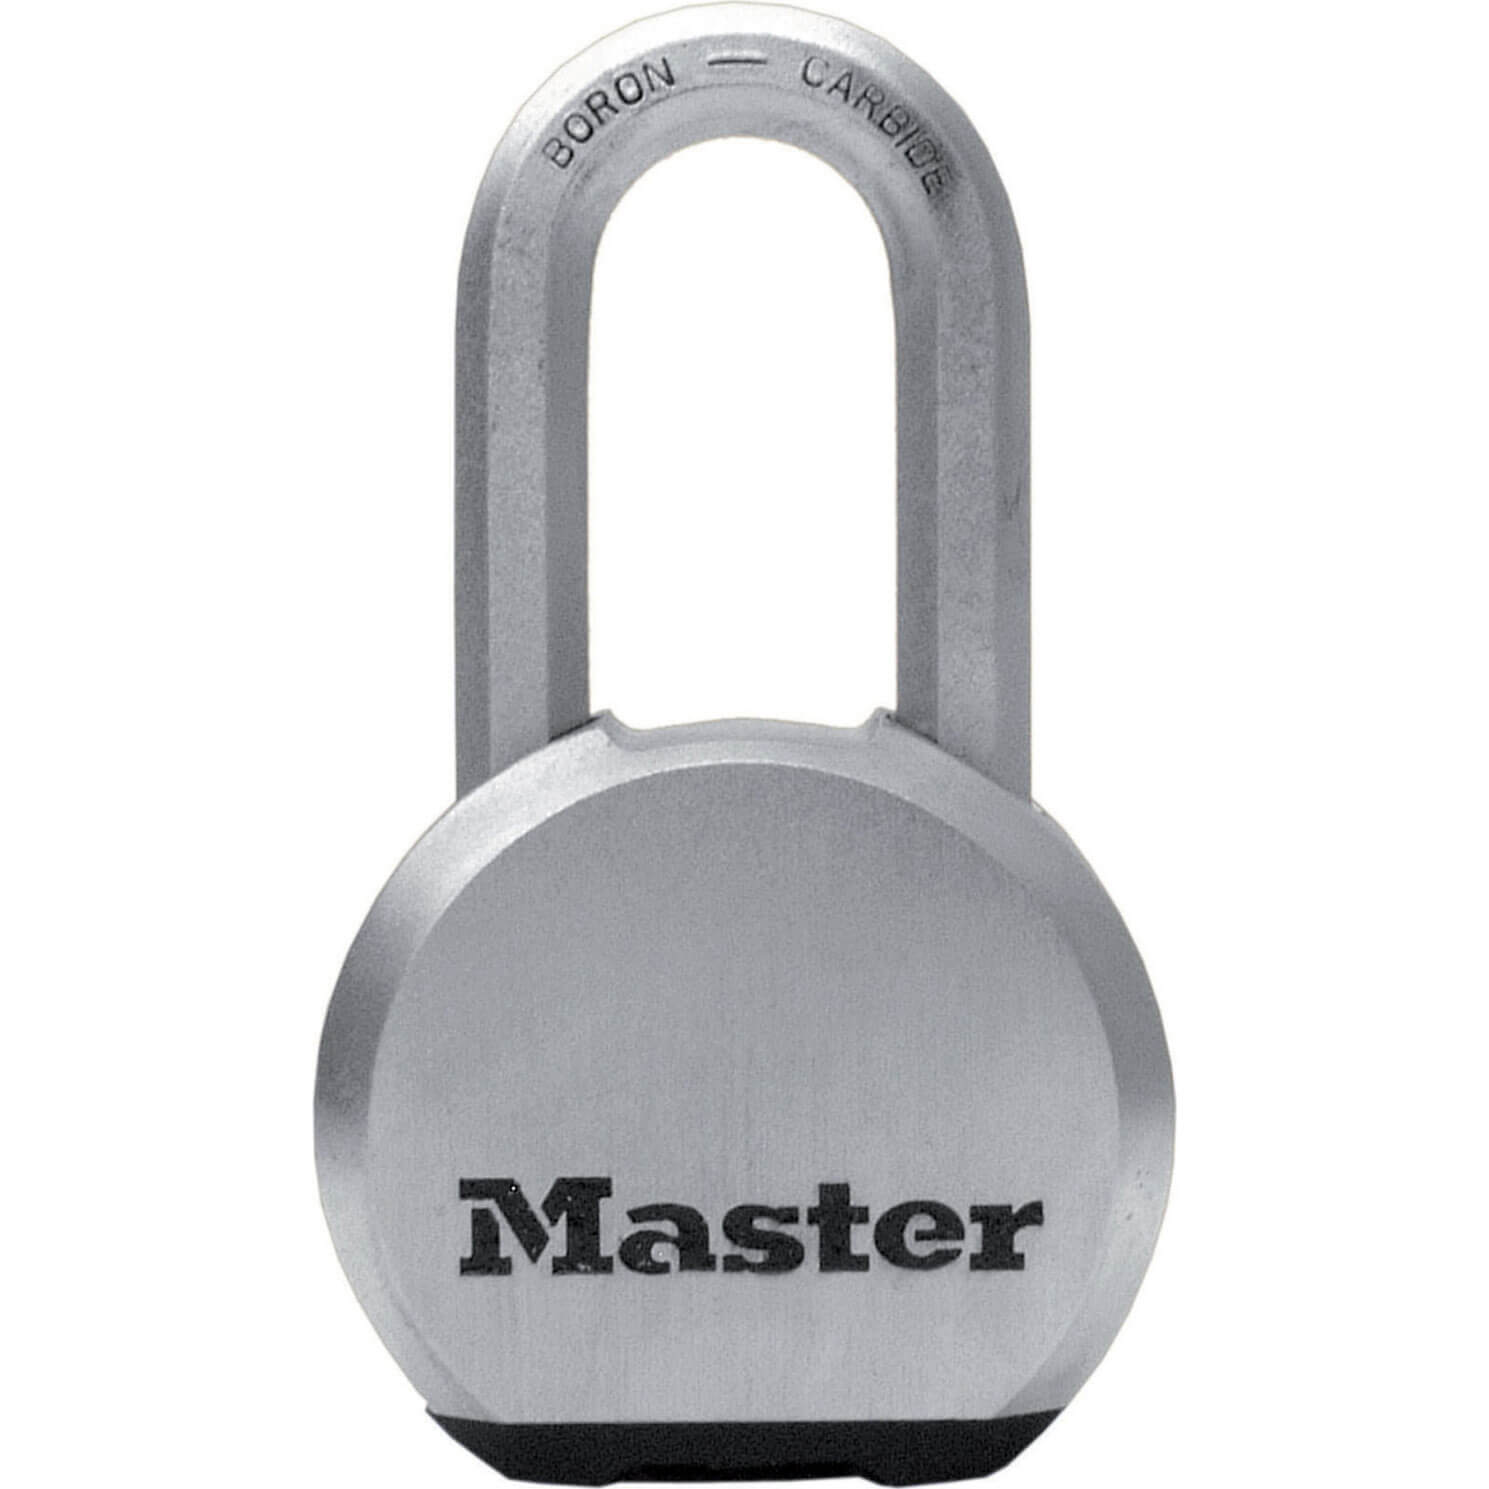 Image of Masterlock Excell Chrome Plated Padlock 54mm Standard